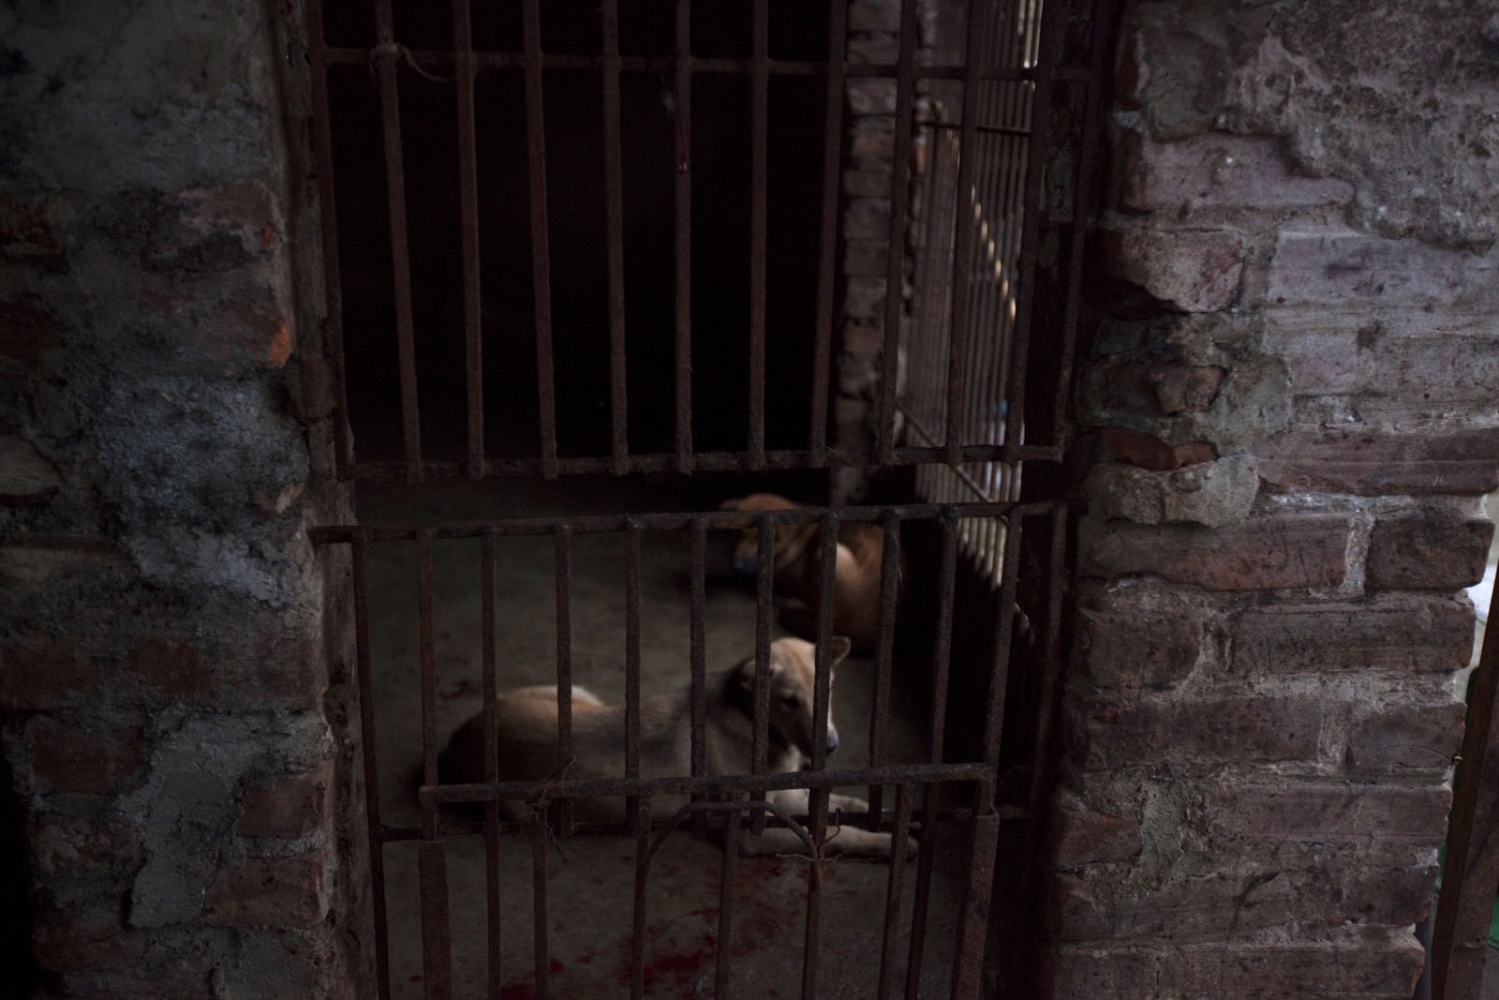 THAILAND'S ILLEGAL DOG MEAT TRADE - A dog sits inside a cage ready to be killed having just...